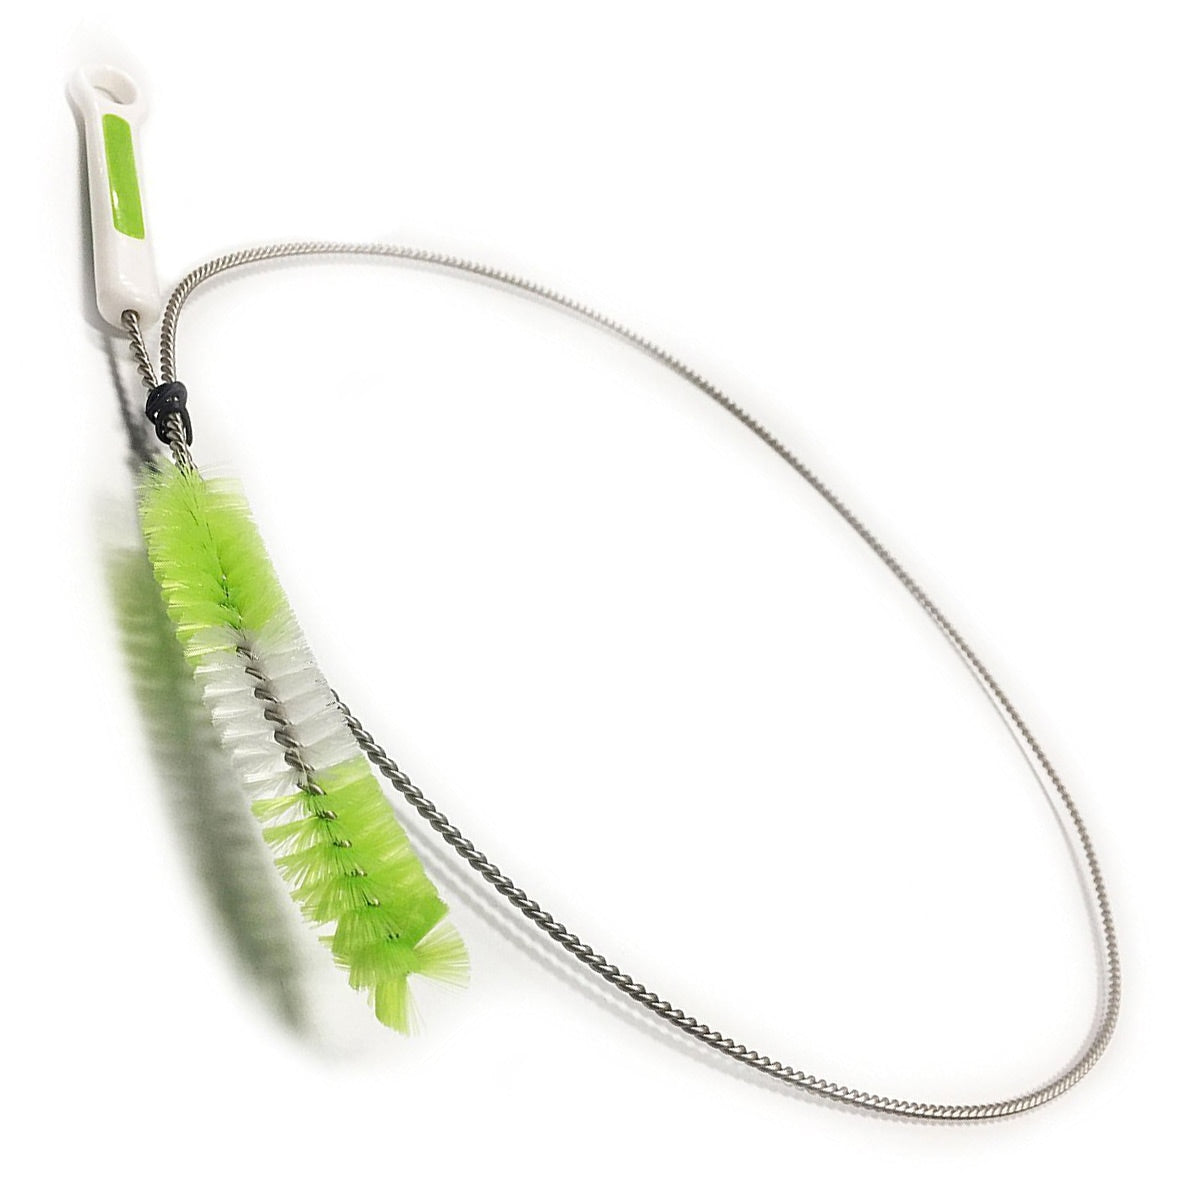 Purdoux CPAP Hose Cleaning Brush